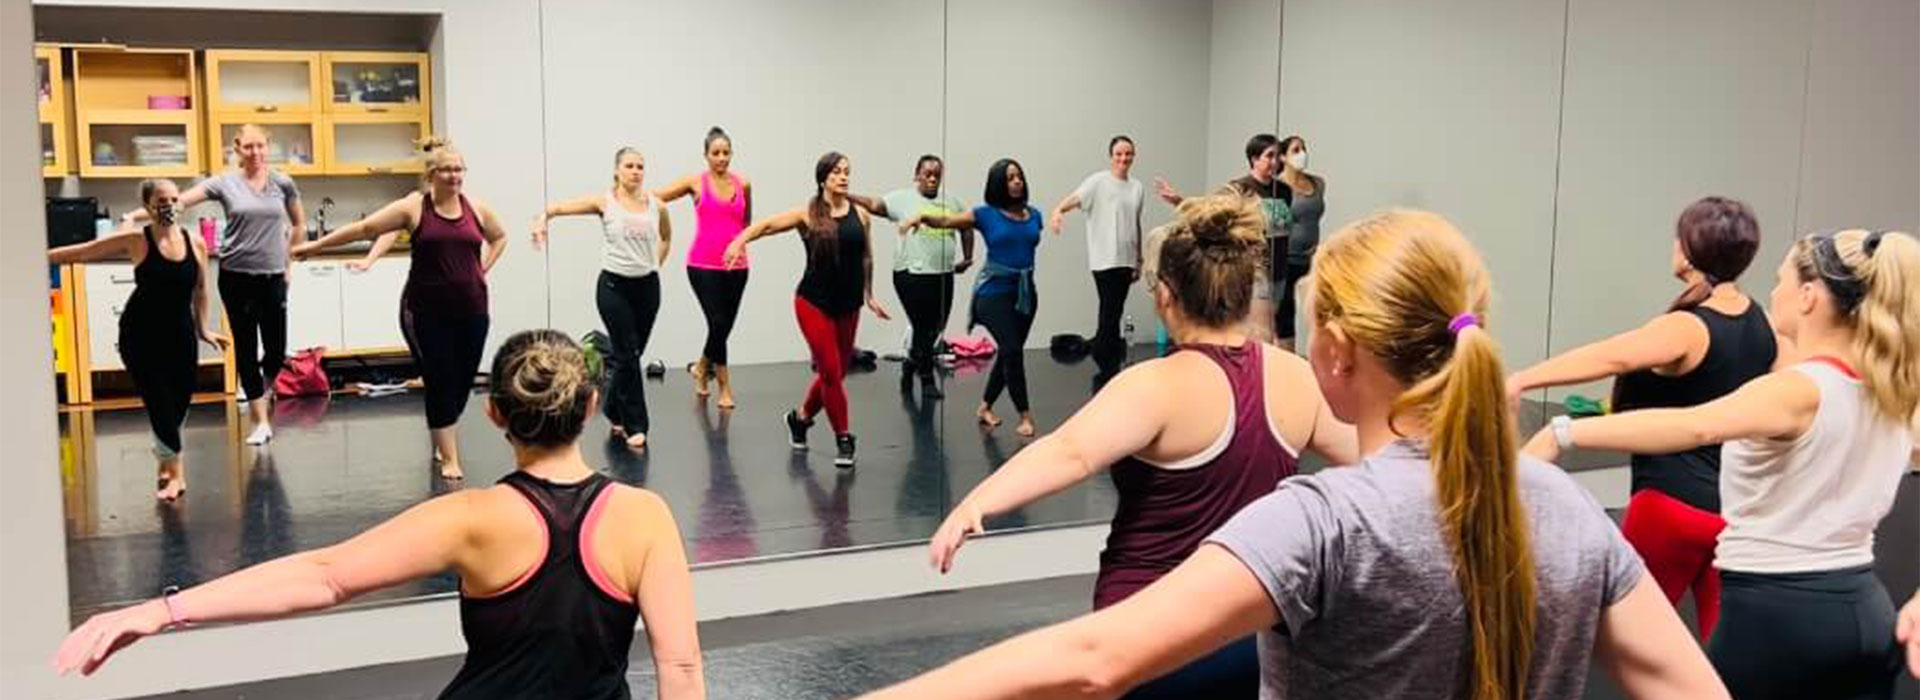 A Dance Studio In Odenton Offering Ballet, Tap, Jazz, Lyrical, Contemporary, and Hip Hop Dance Classes